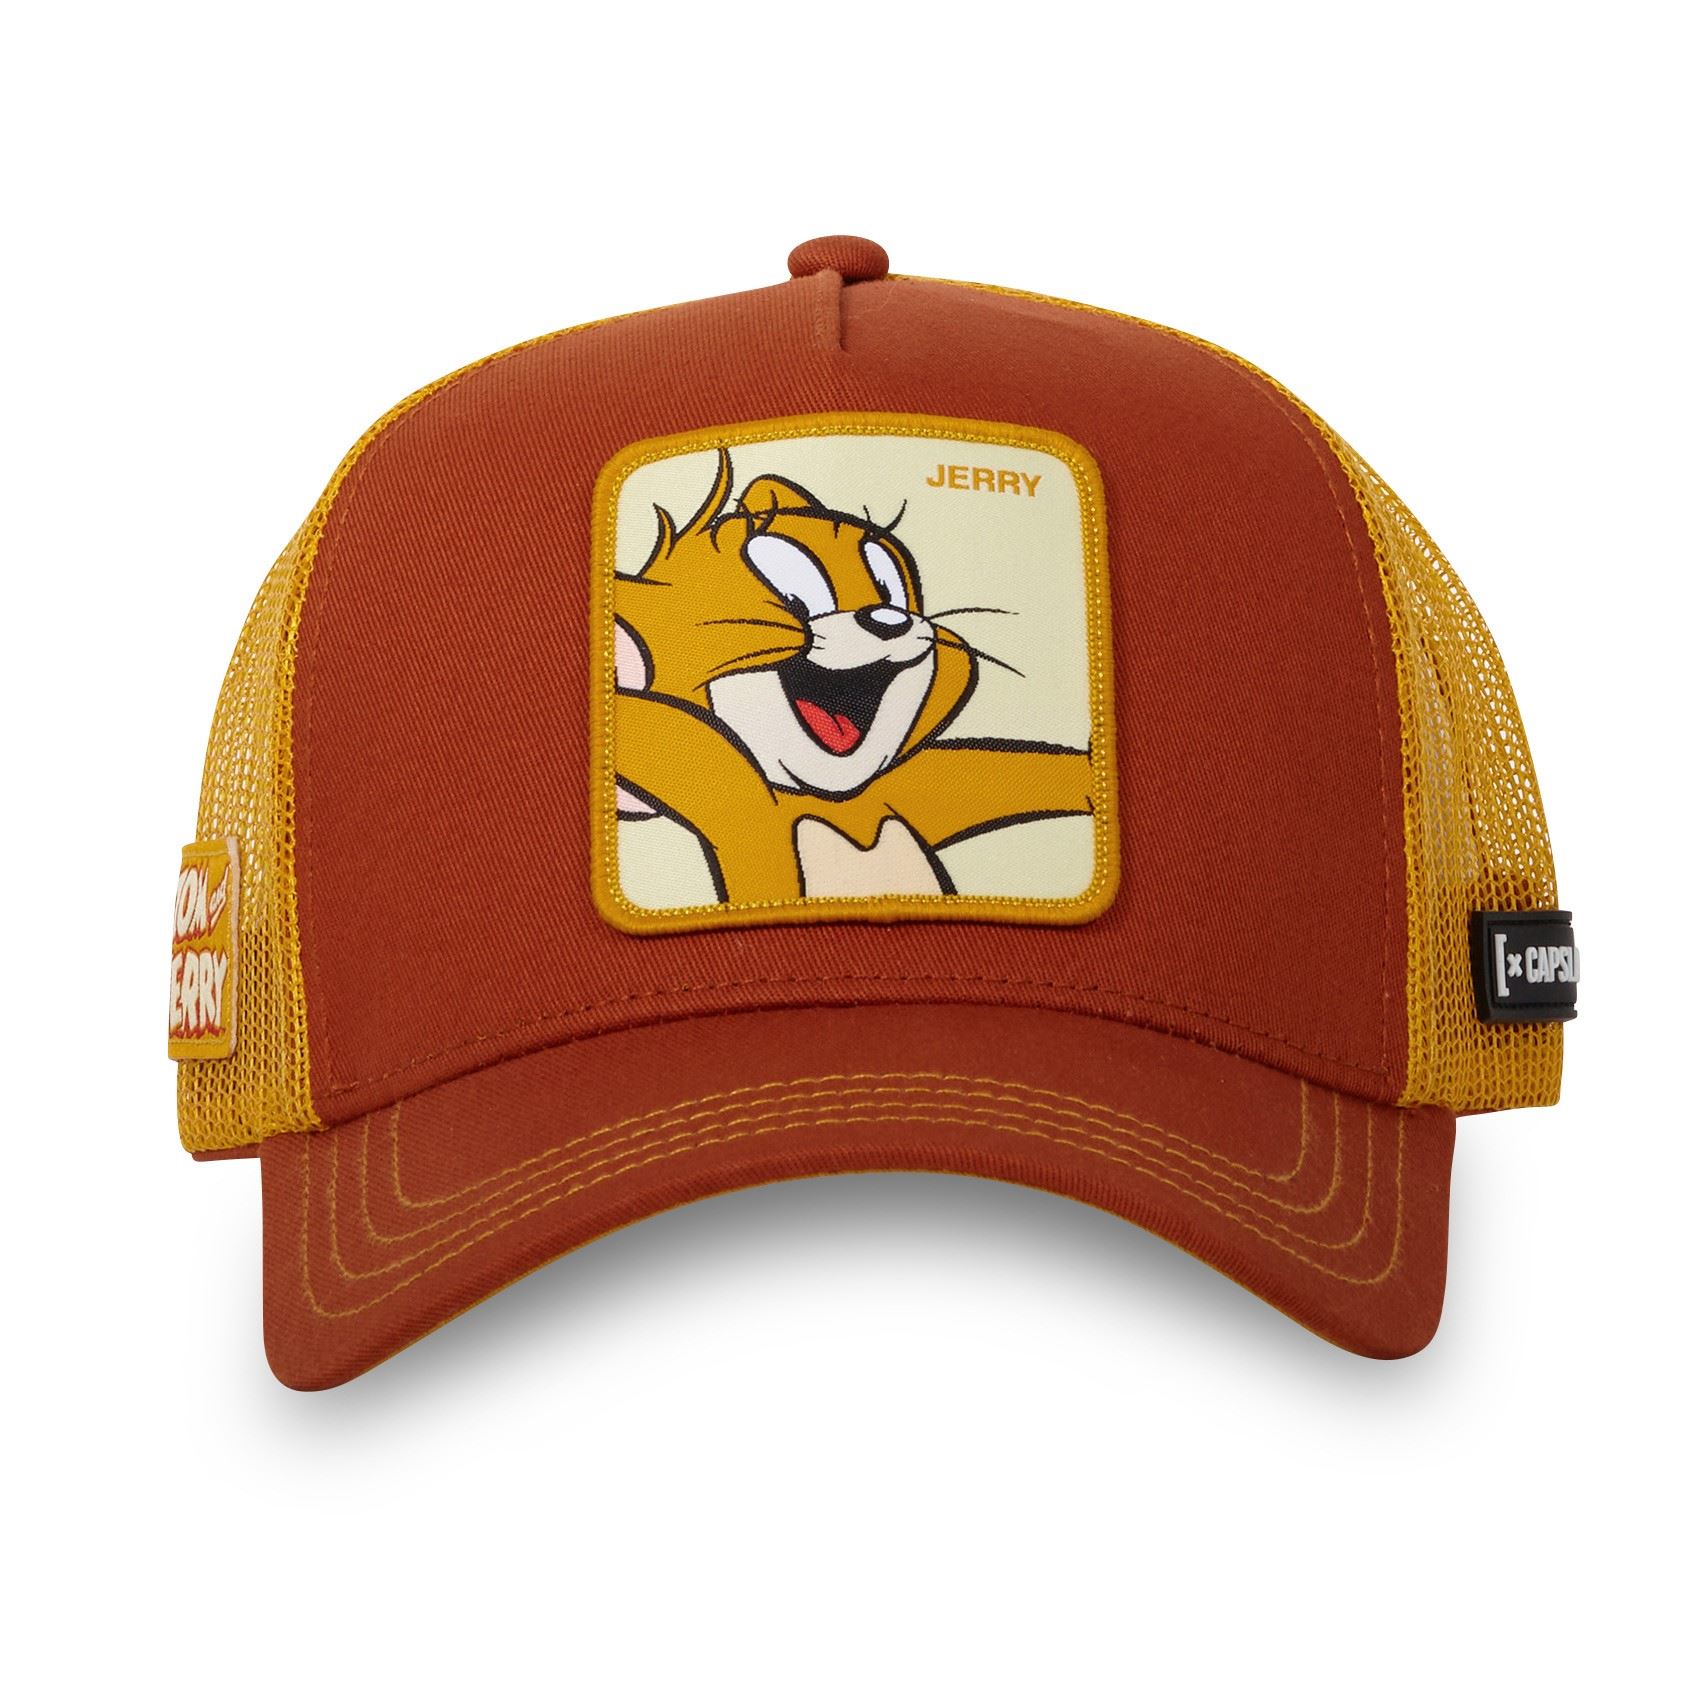 Jerry Tom and Jerry Red Yellow Trucker Cap Capslab